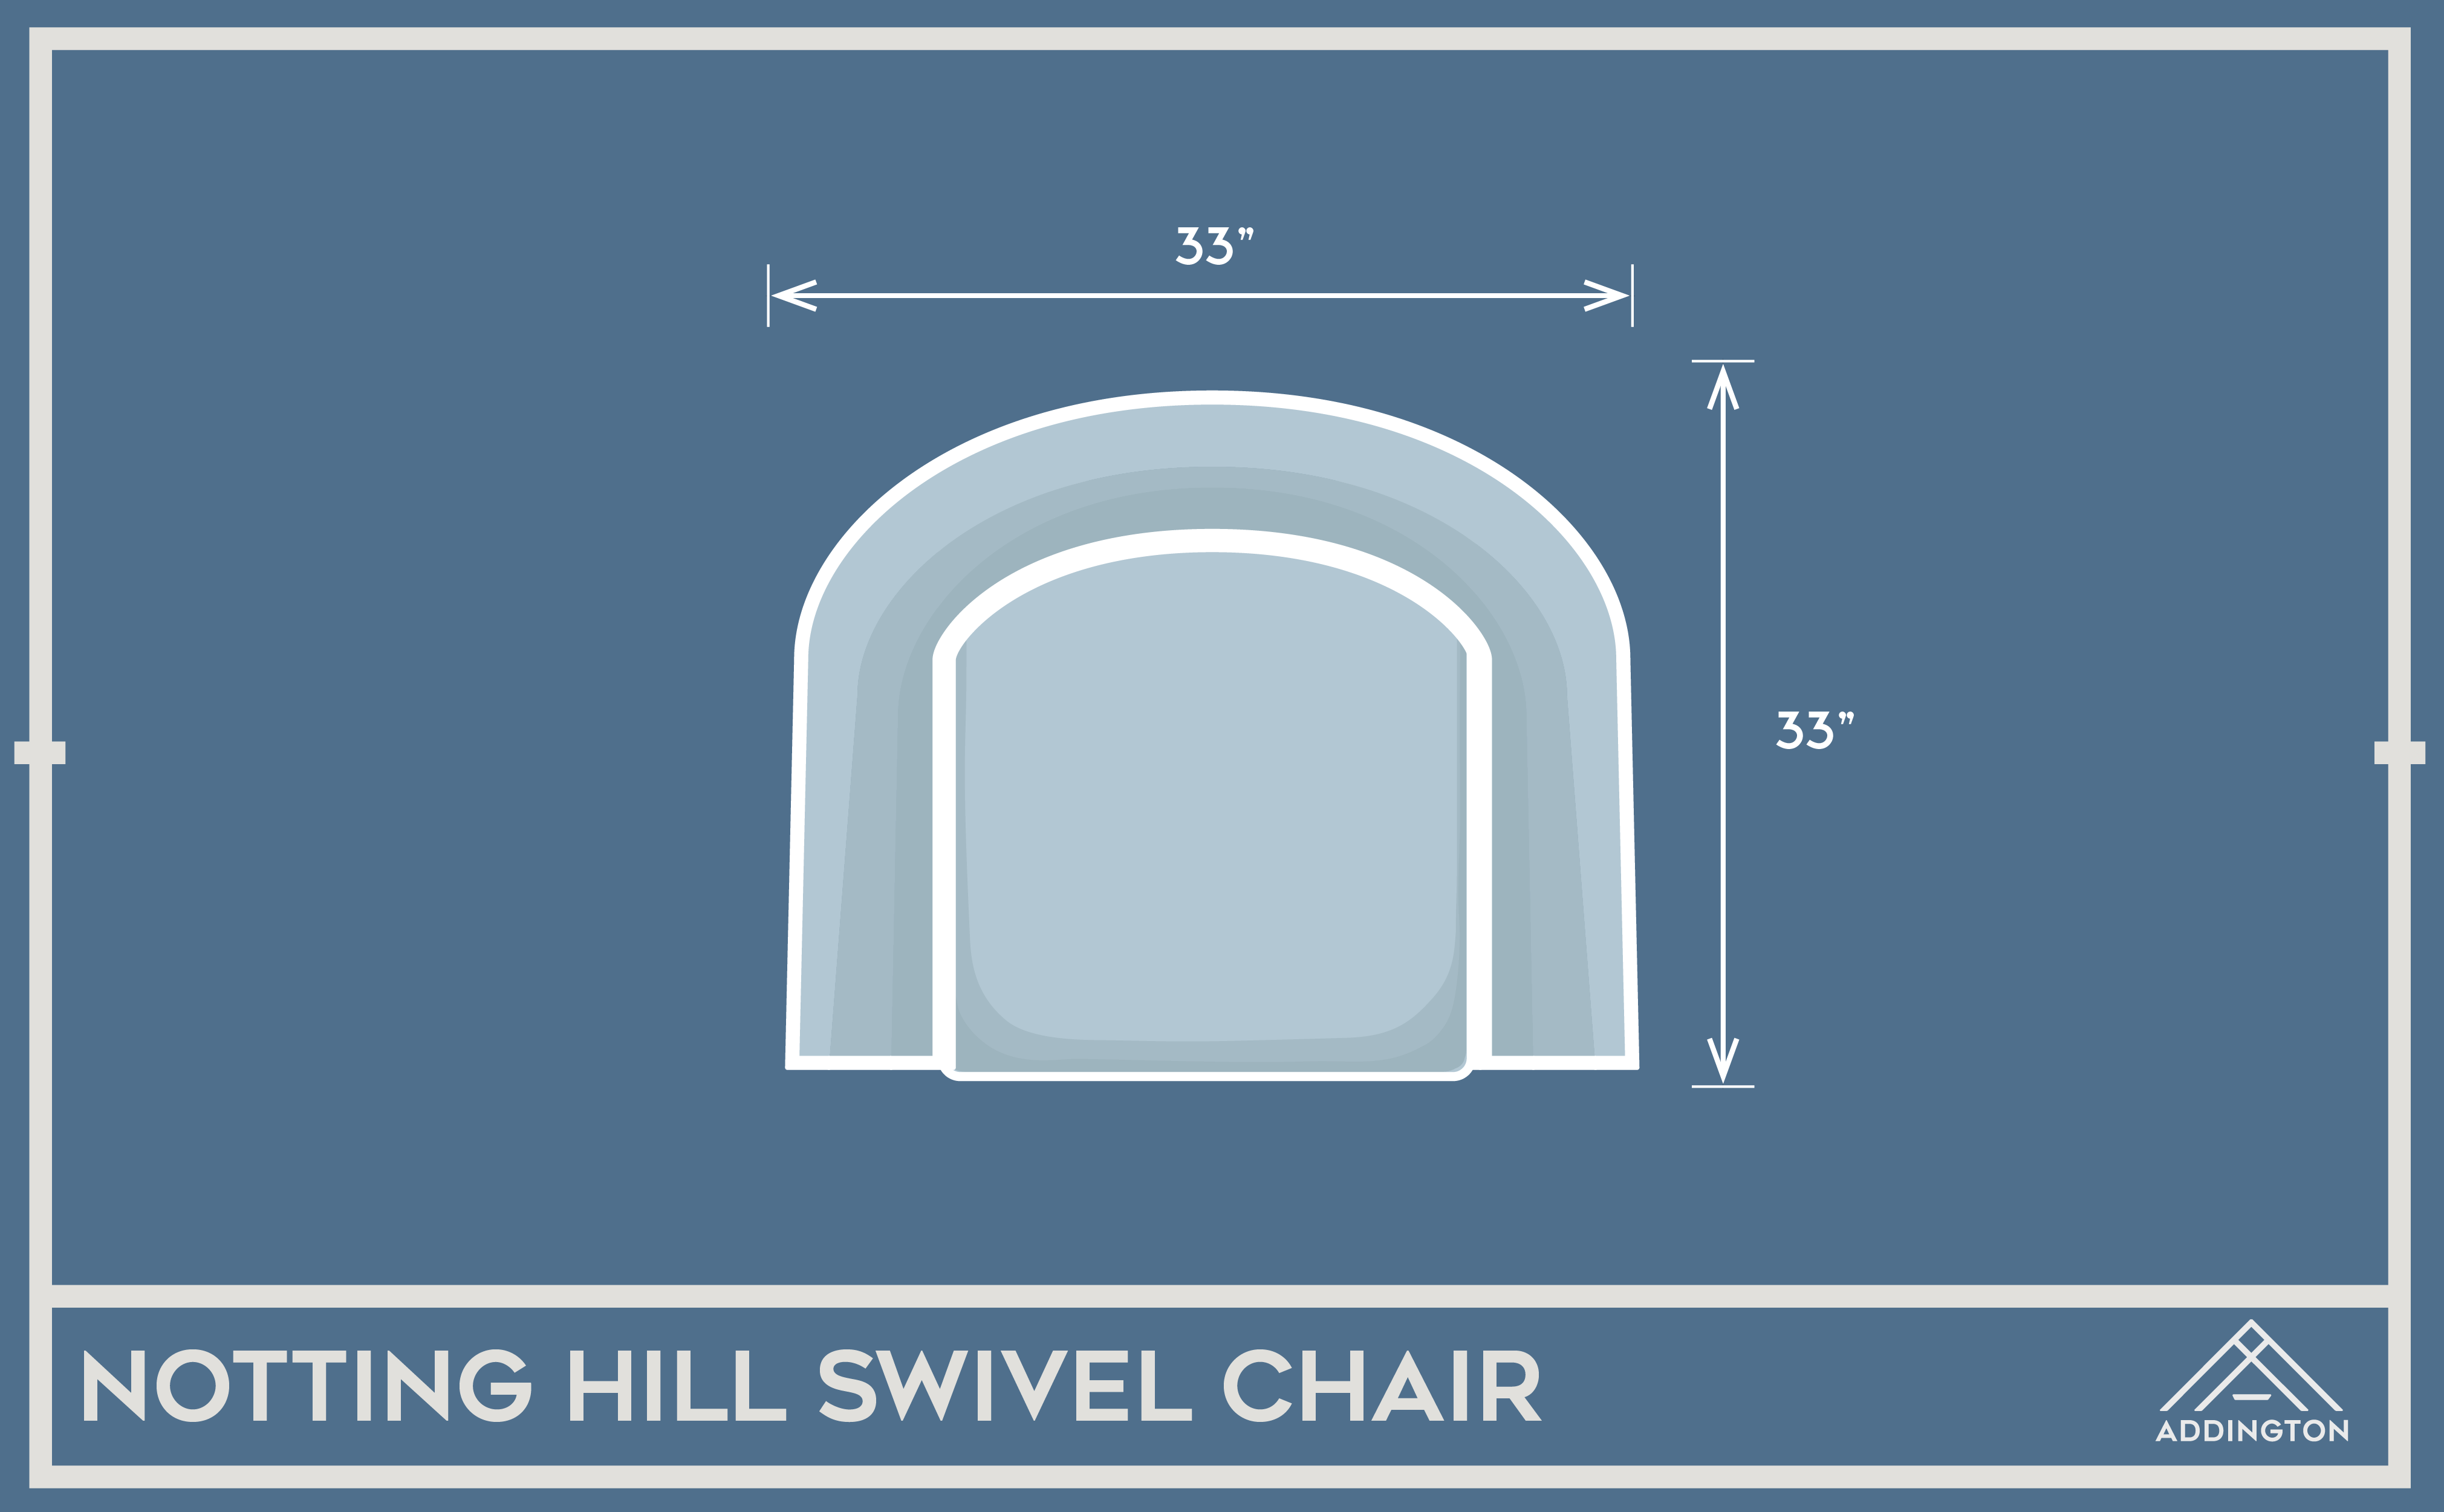 nottin hill swivel chair  rectangle apluse.png__PID:21524bc8-99a7-483c-a9bd-1b61fd47702a